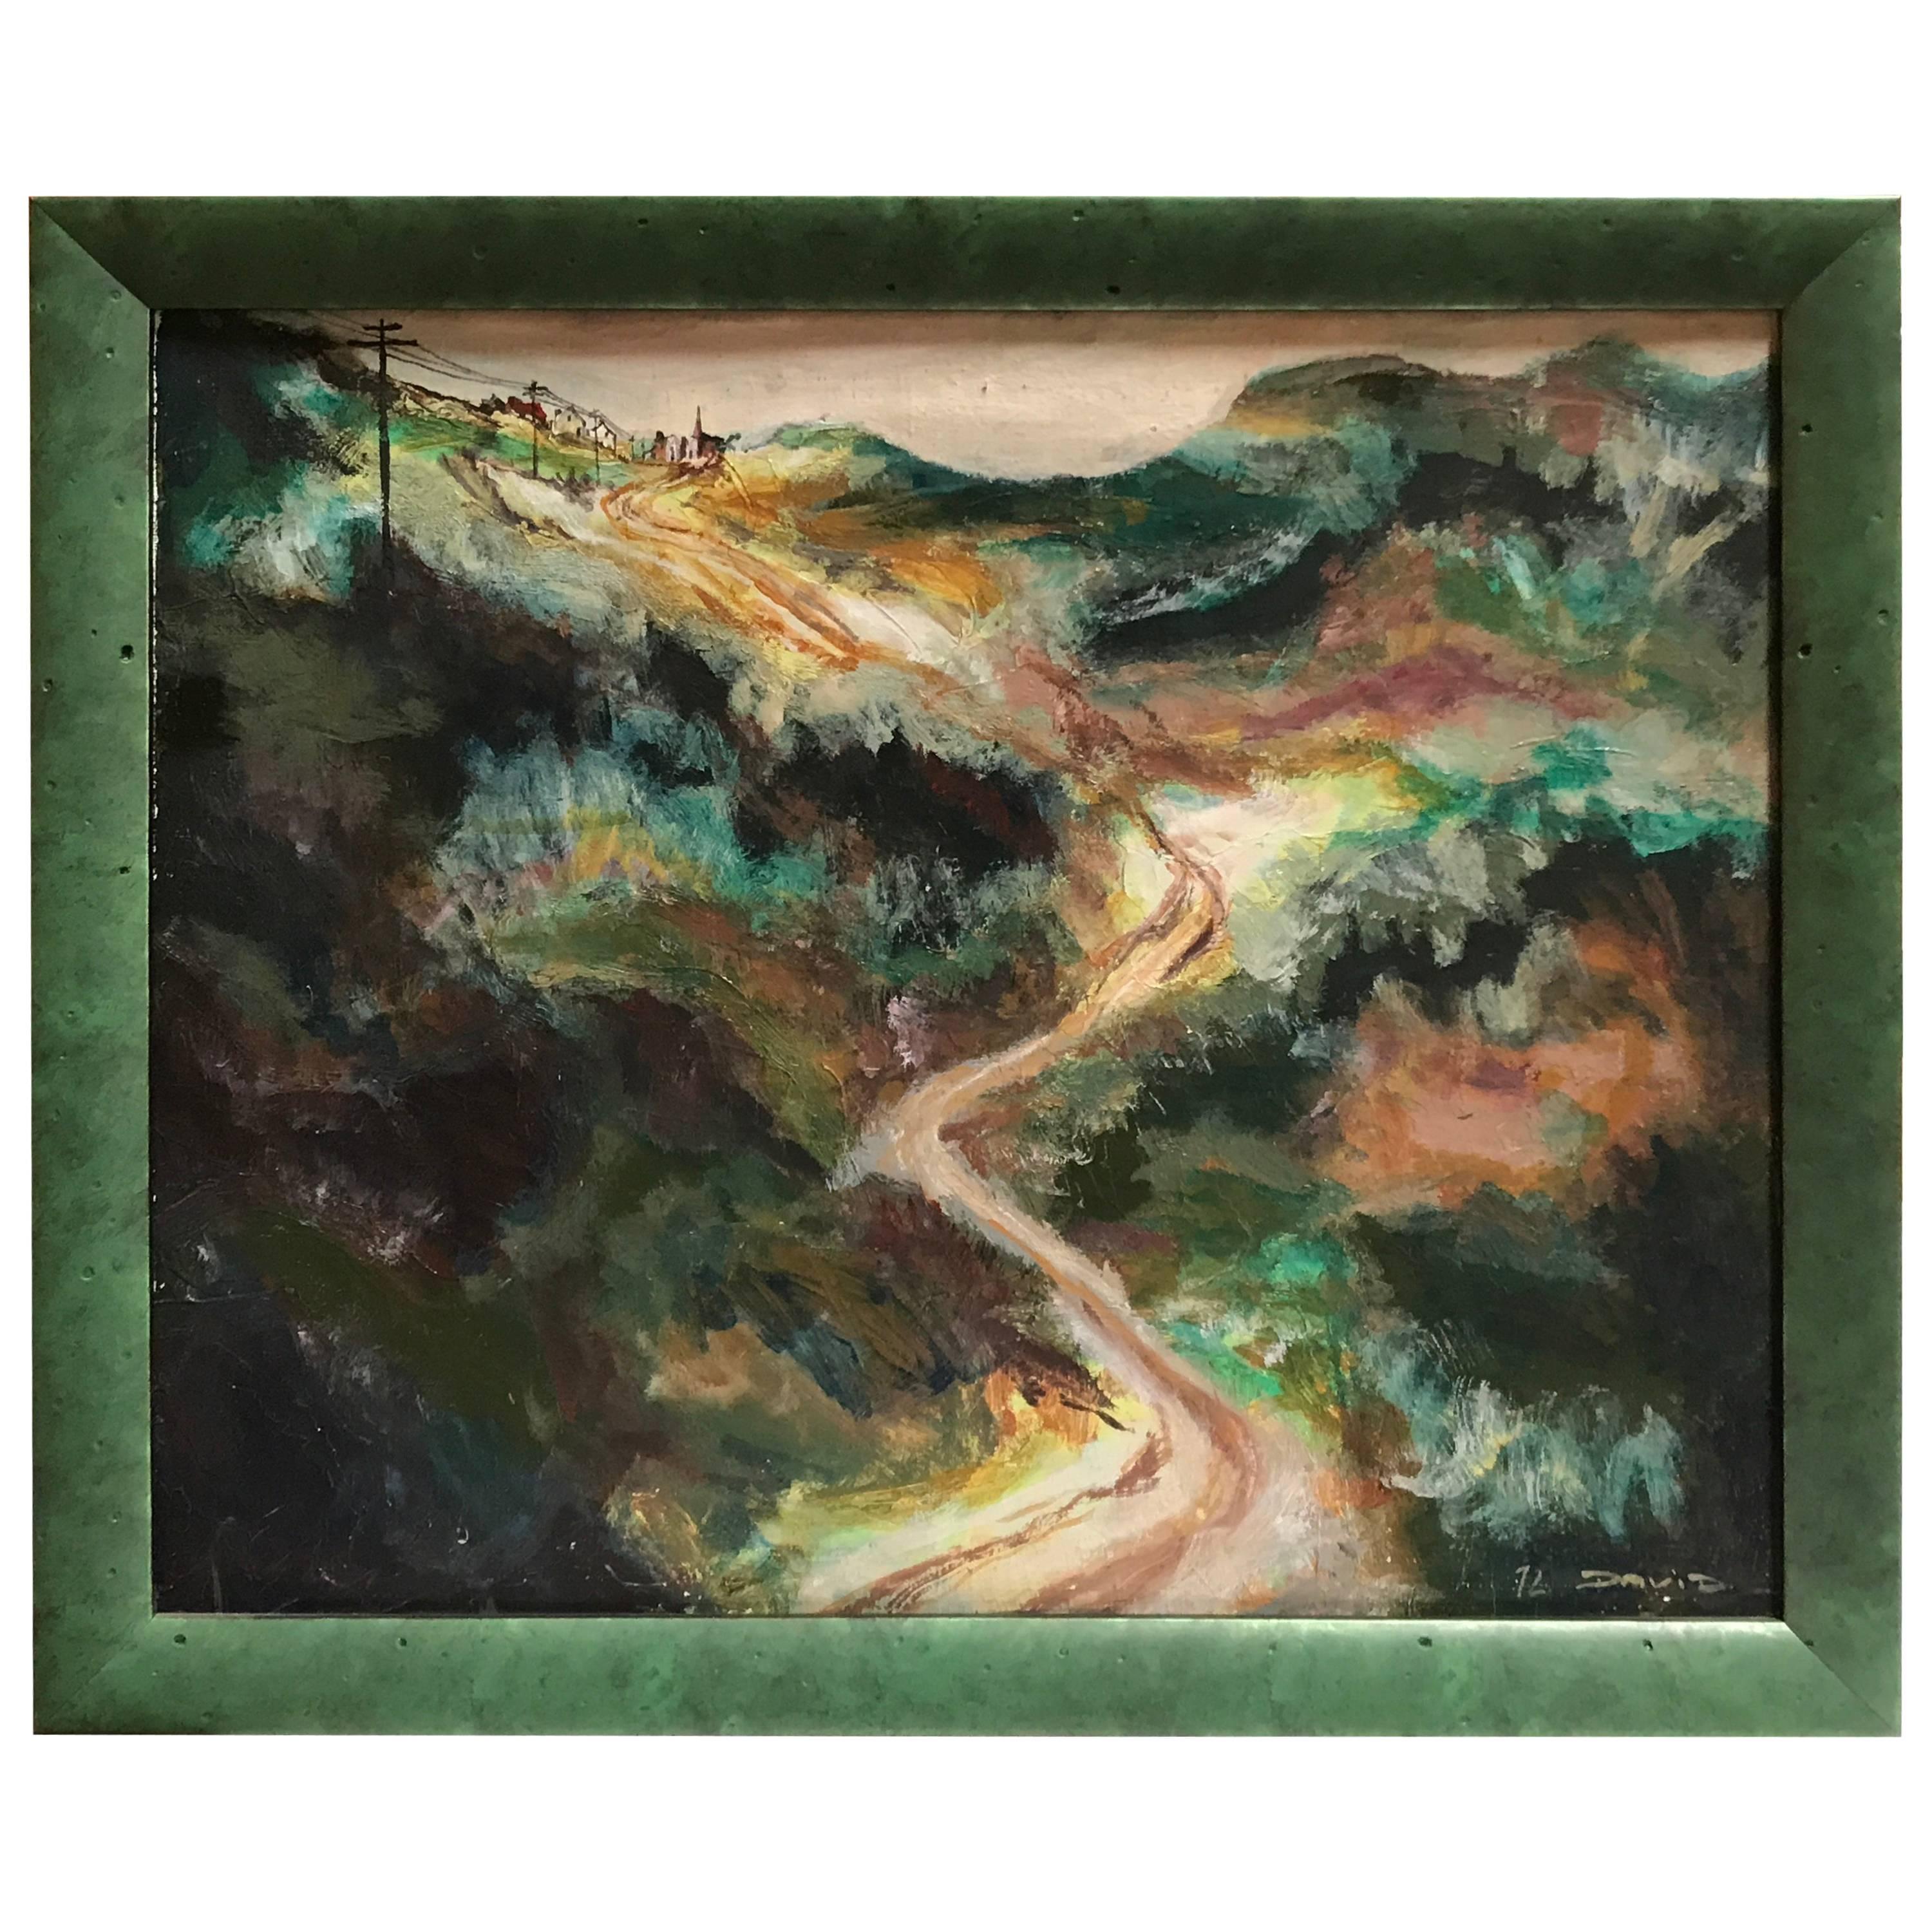 Charming Painting of a French Mountain Village Road Signed "David"